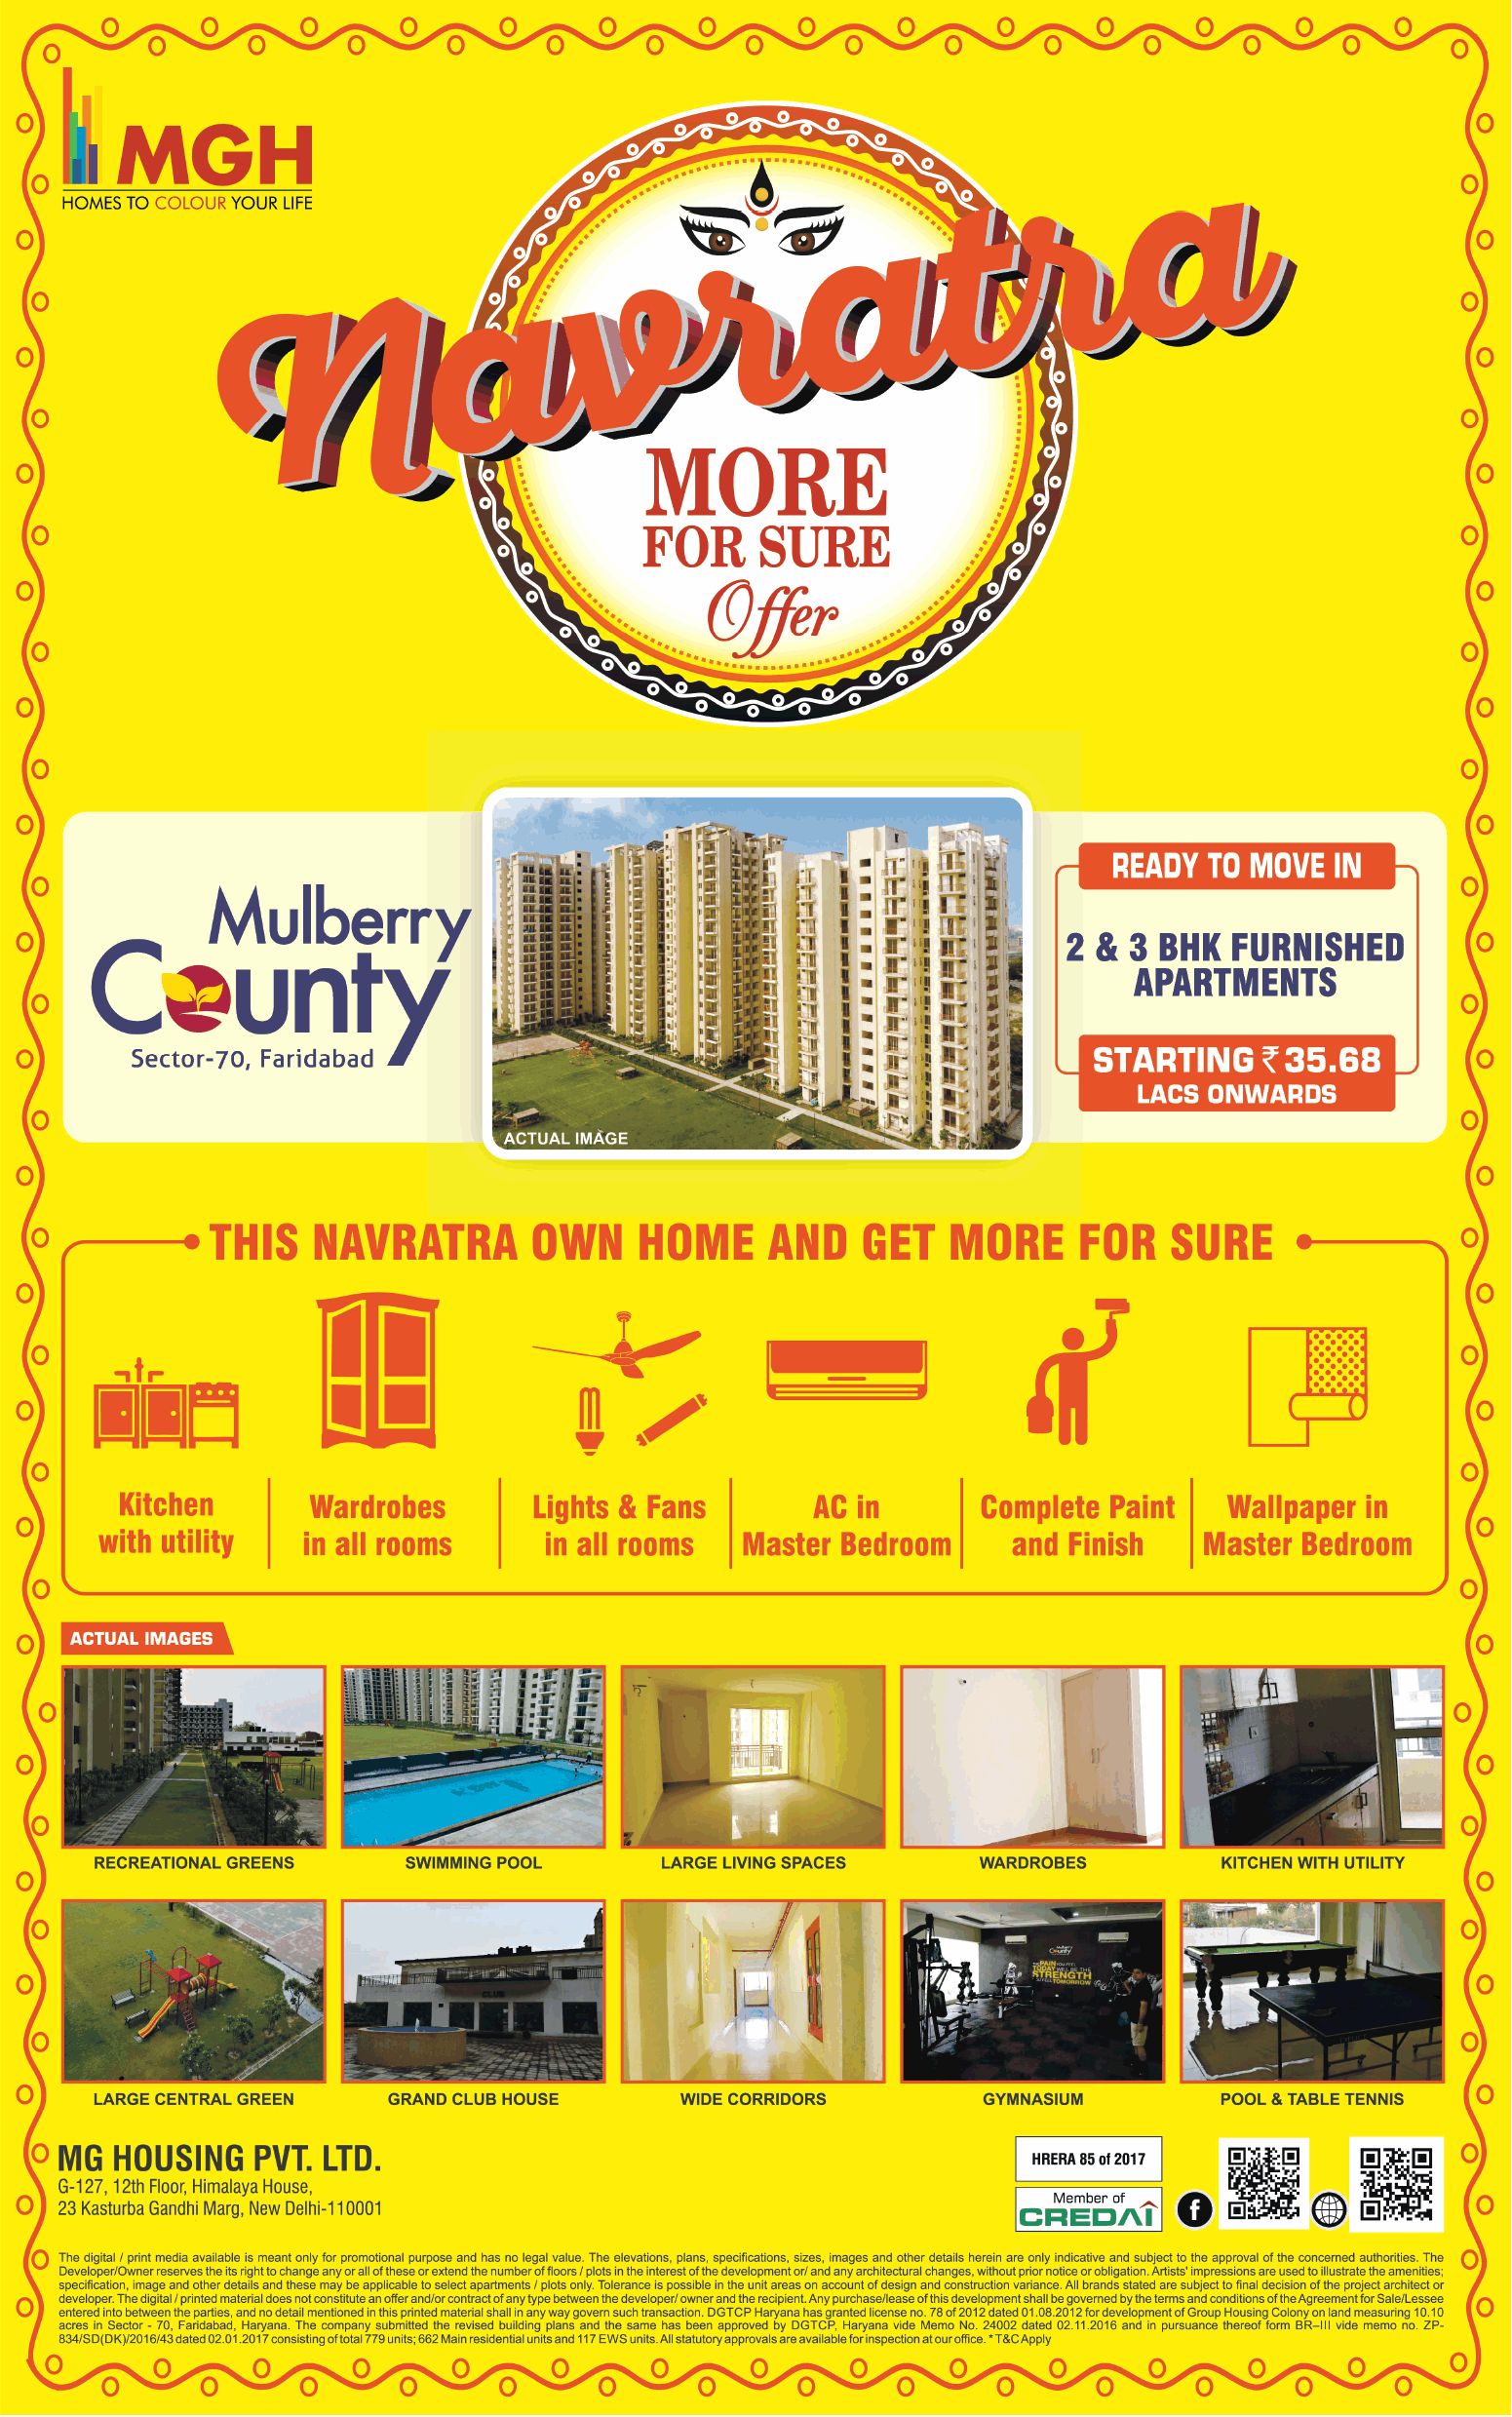 Book 2 & 3 BHK furnished apartments Rs 35.68 Lac at MGH Mulberry County in Faridabad Update